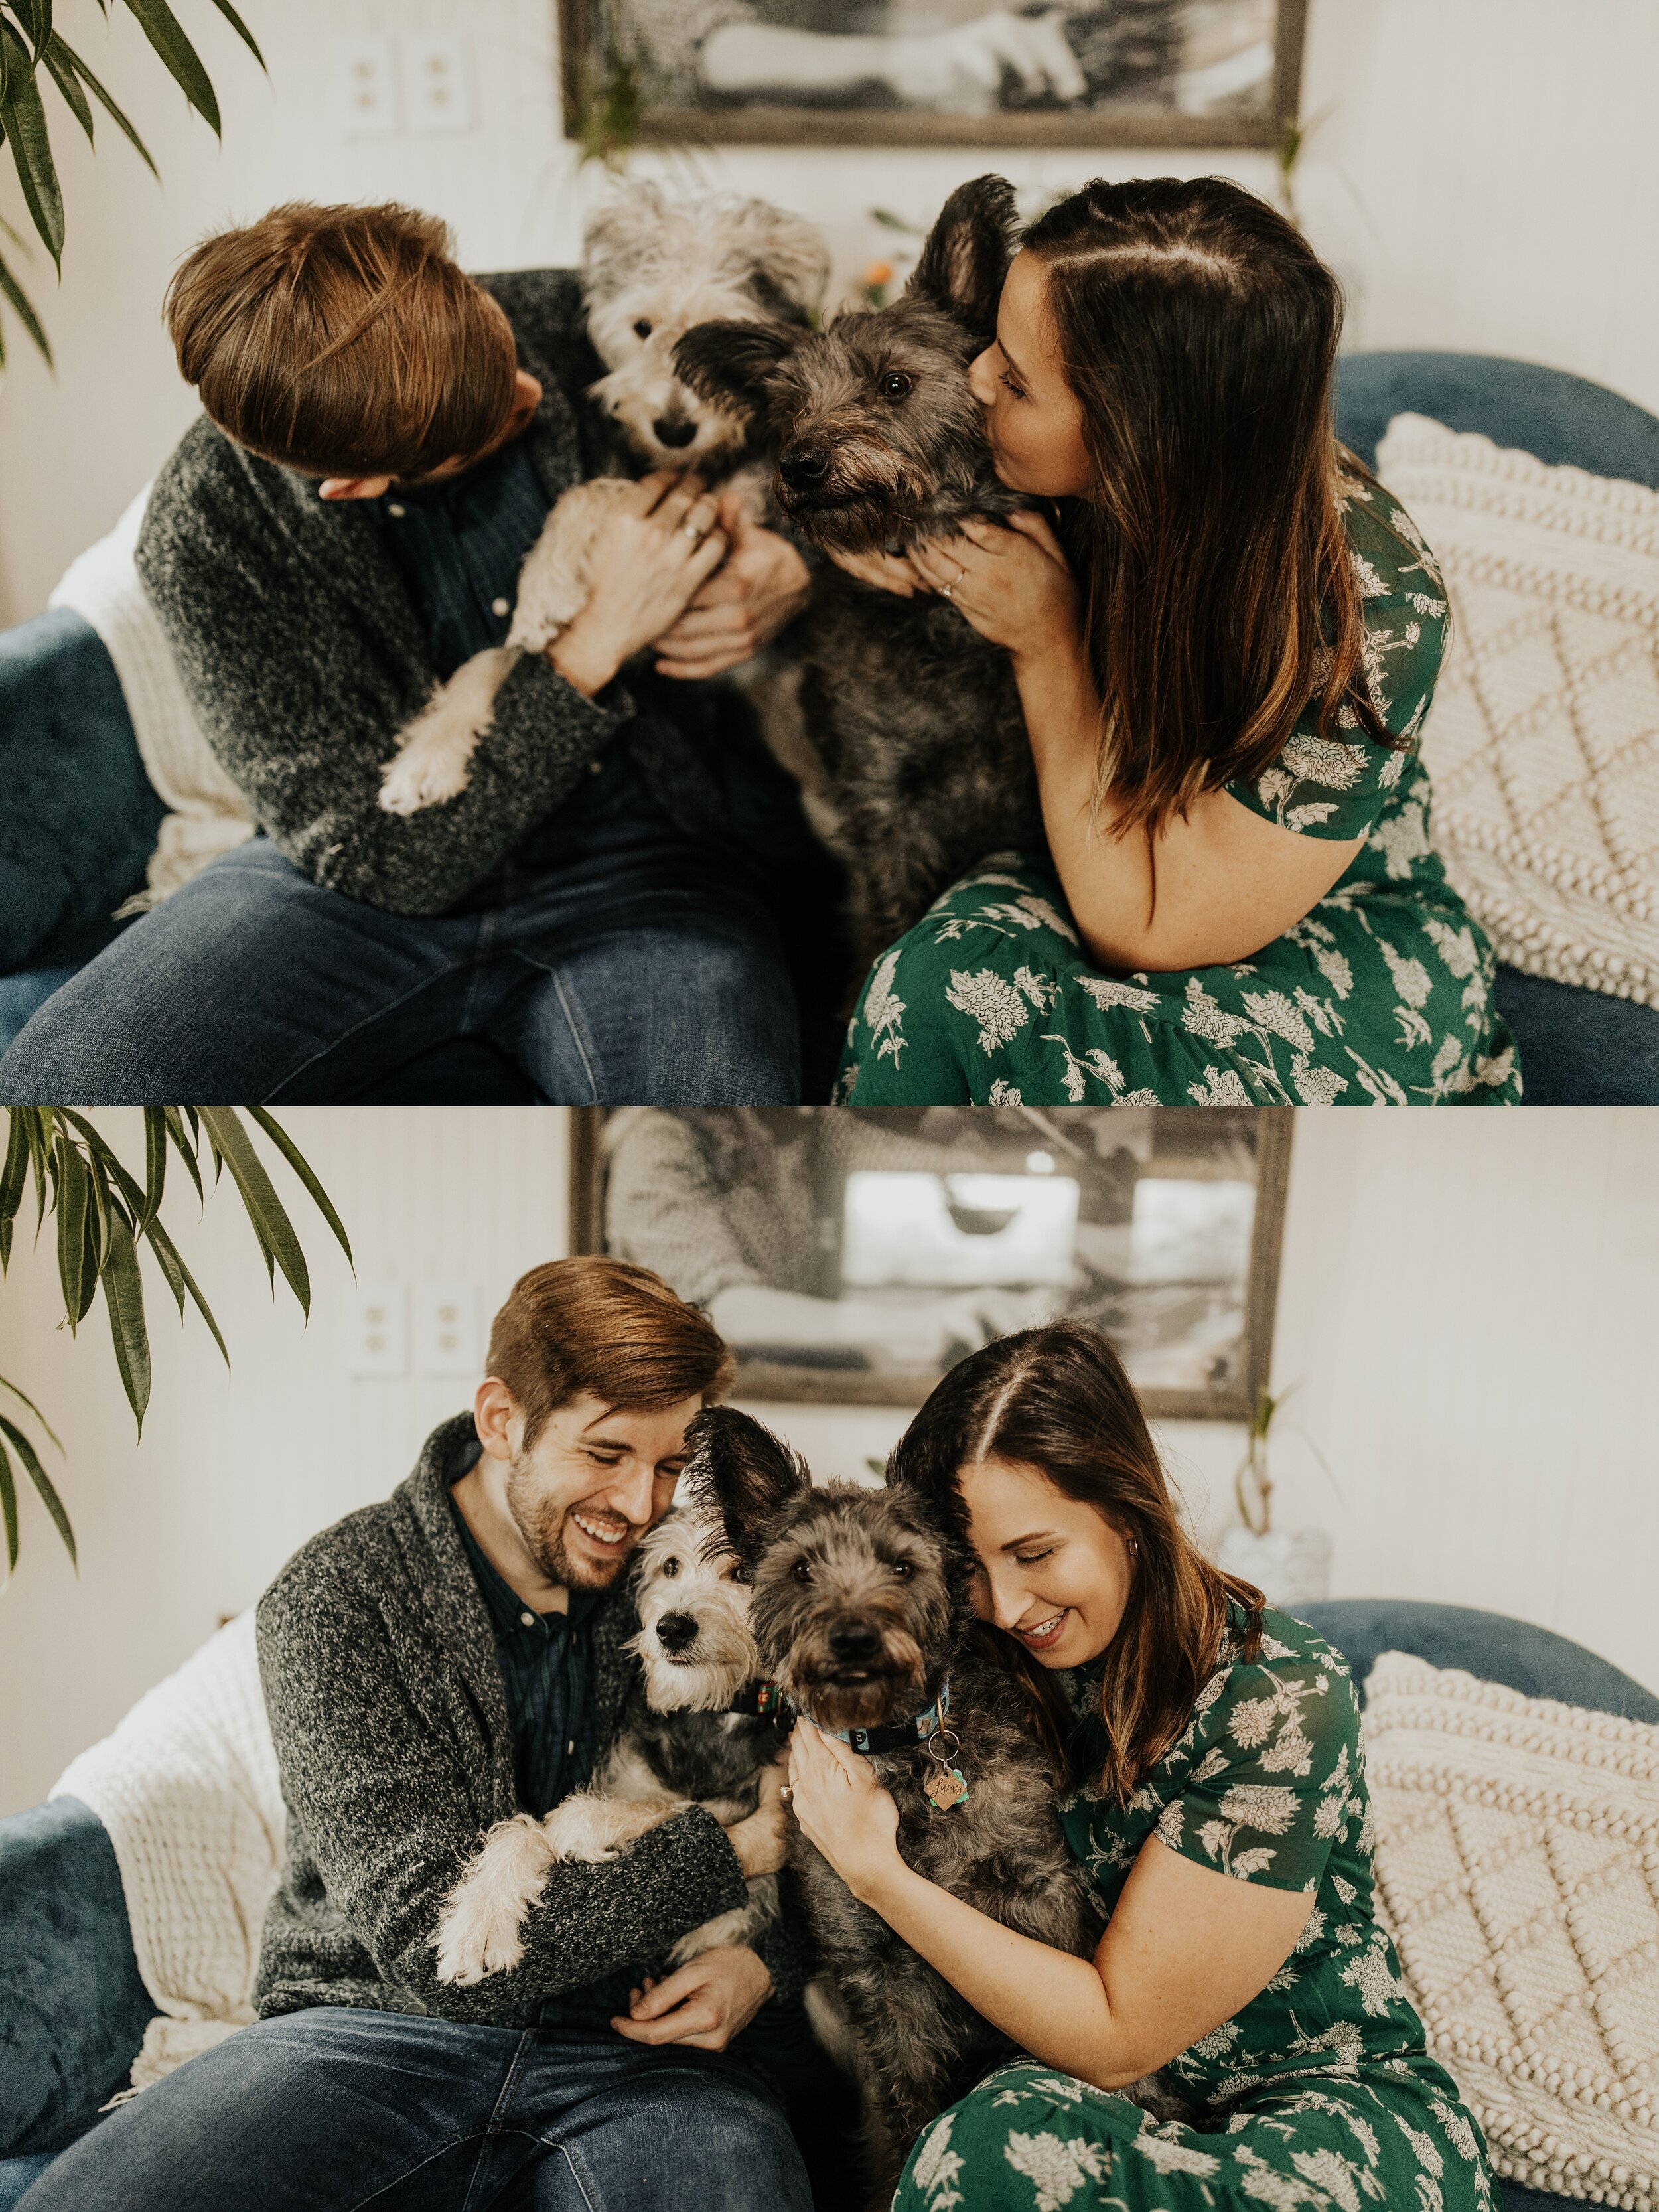 jessika-christine-photography-in+home-engagement-couples-cozy-adventurous-session (10).jpg